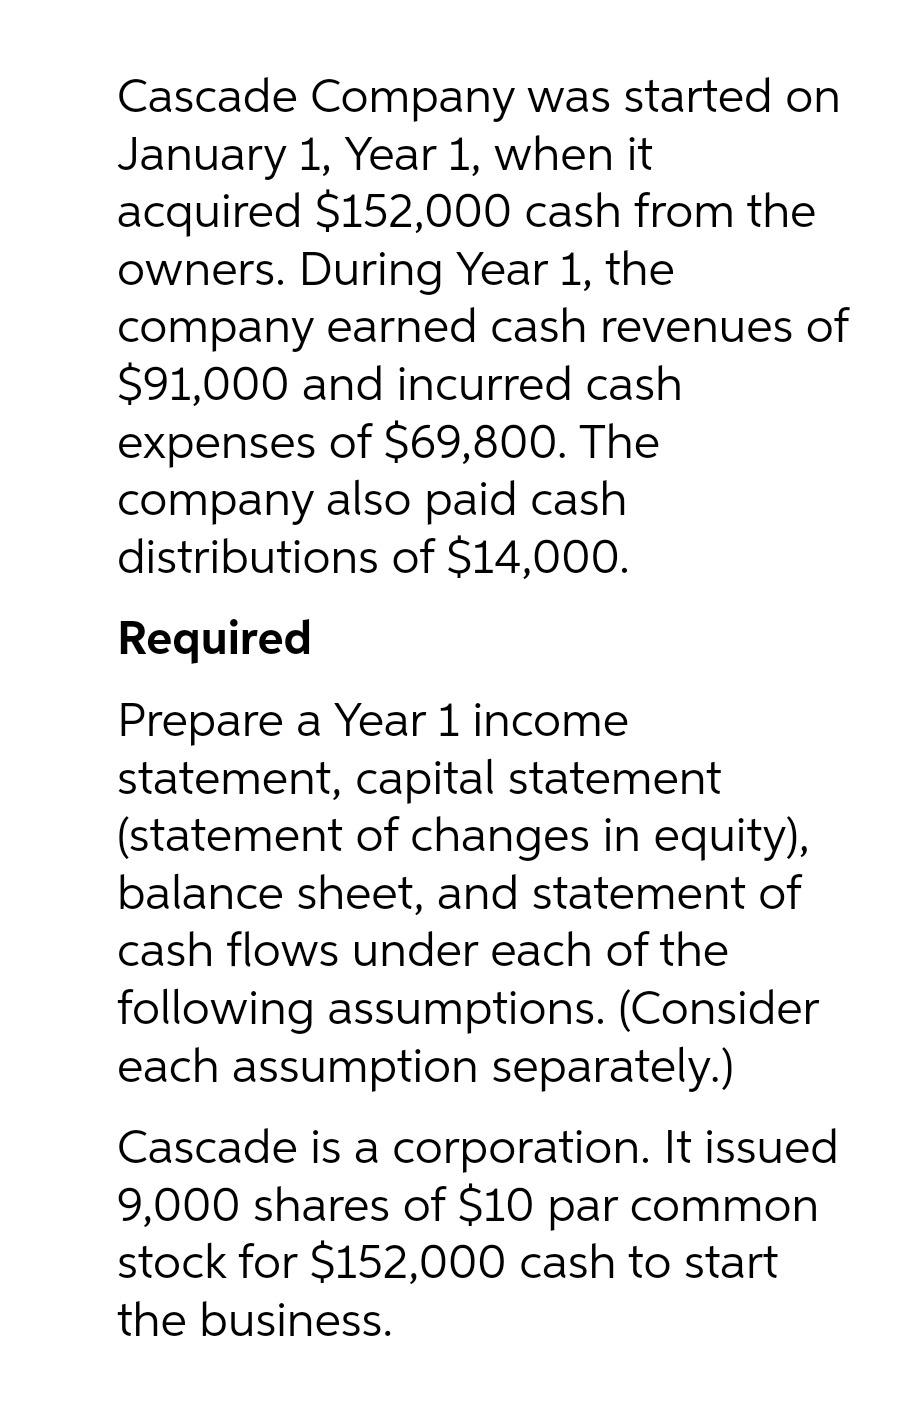 Cascade Company was started on
January 1, Year 1, when it
acquired $152,000 cash from the
owners. During Year 1, the
company earned cash revenues of
$91,000 and incurred cash
expenses of $69,800. The
company also paid cash
distributions of $14,000.
Required
Prepare a Year 1 income
statement, capital statement
(statement of changes in equity),
balance sheet, and statement of
cash flows under each of the
following assumptions. (Consider
each assumption separately.)
Cascade is a corporation. It issued
9,000 shares of $10 par common
stock for $152,000 cash to start
the business.